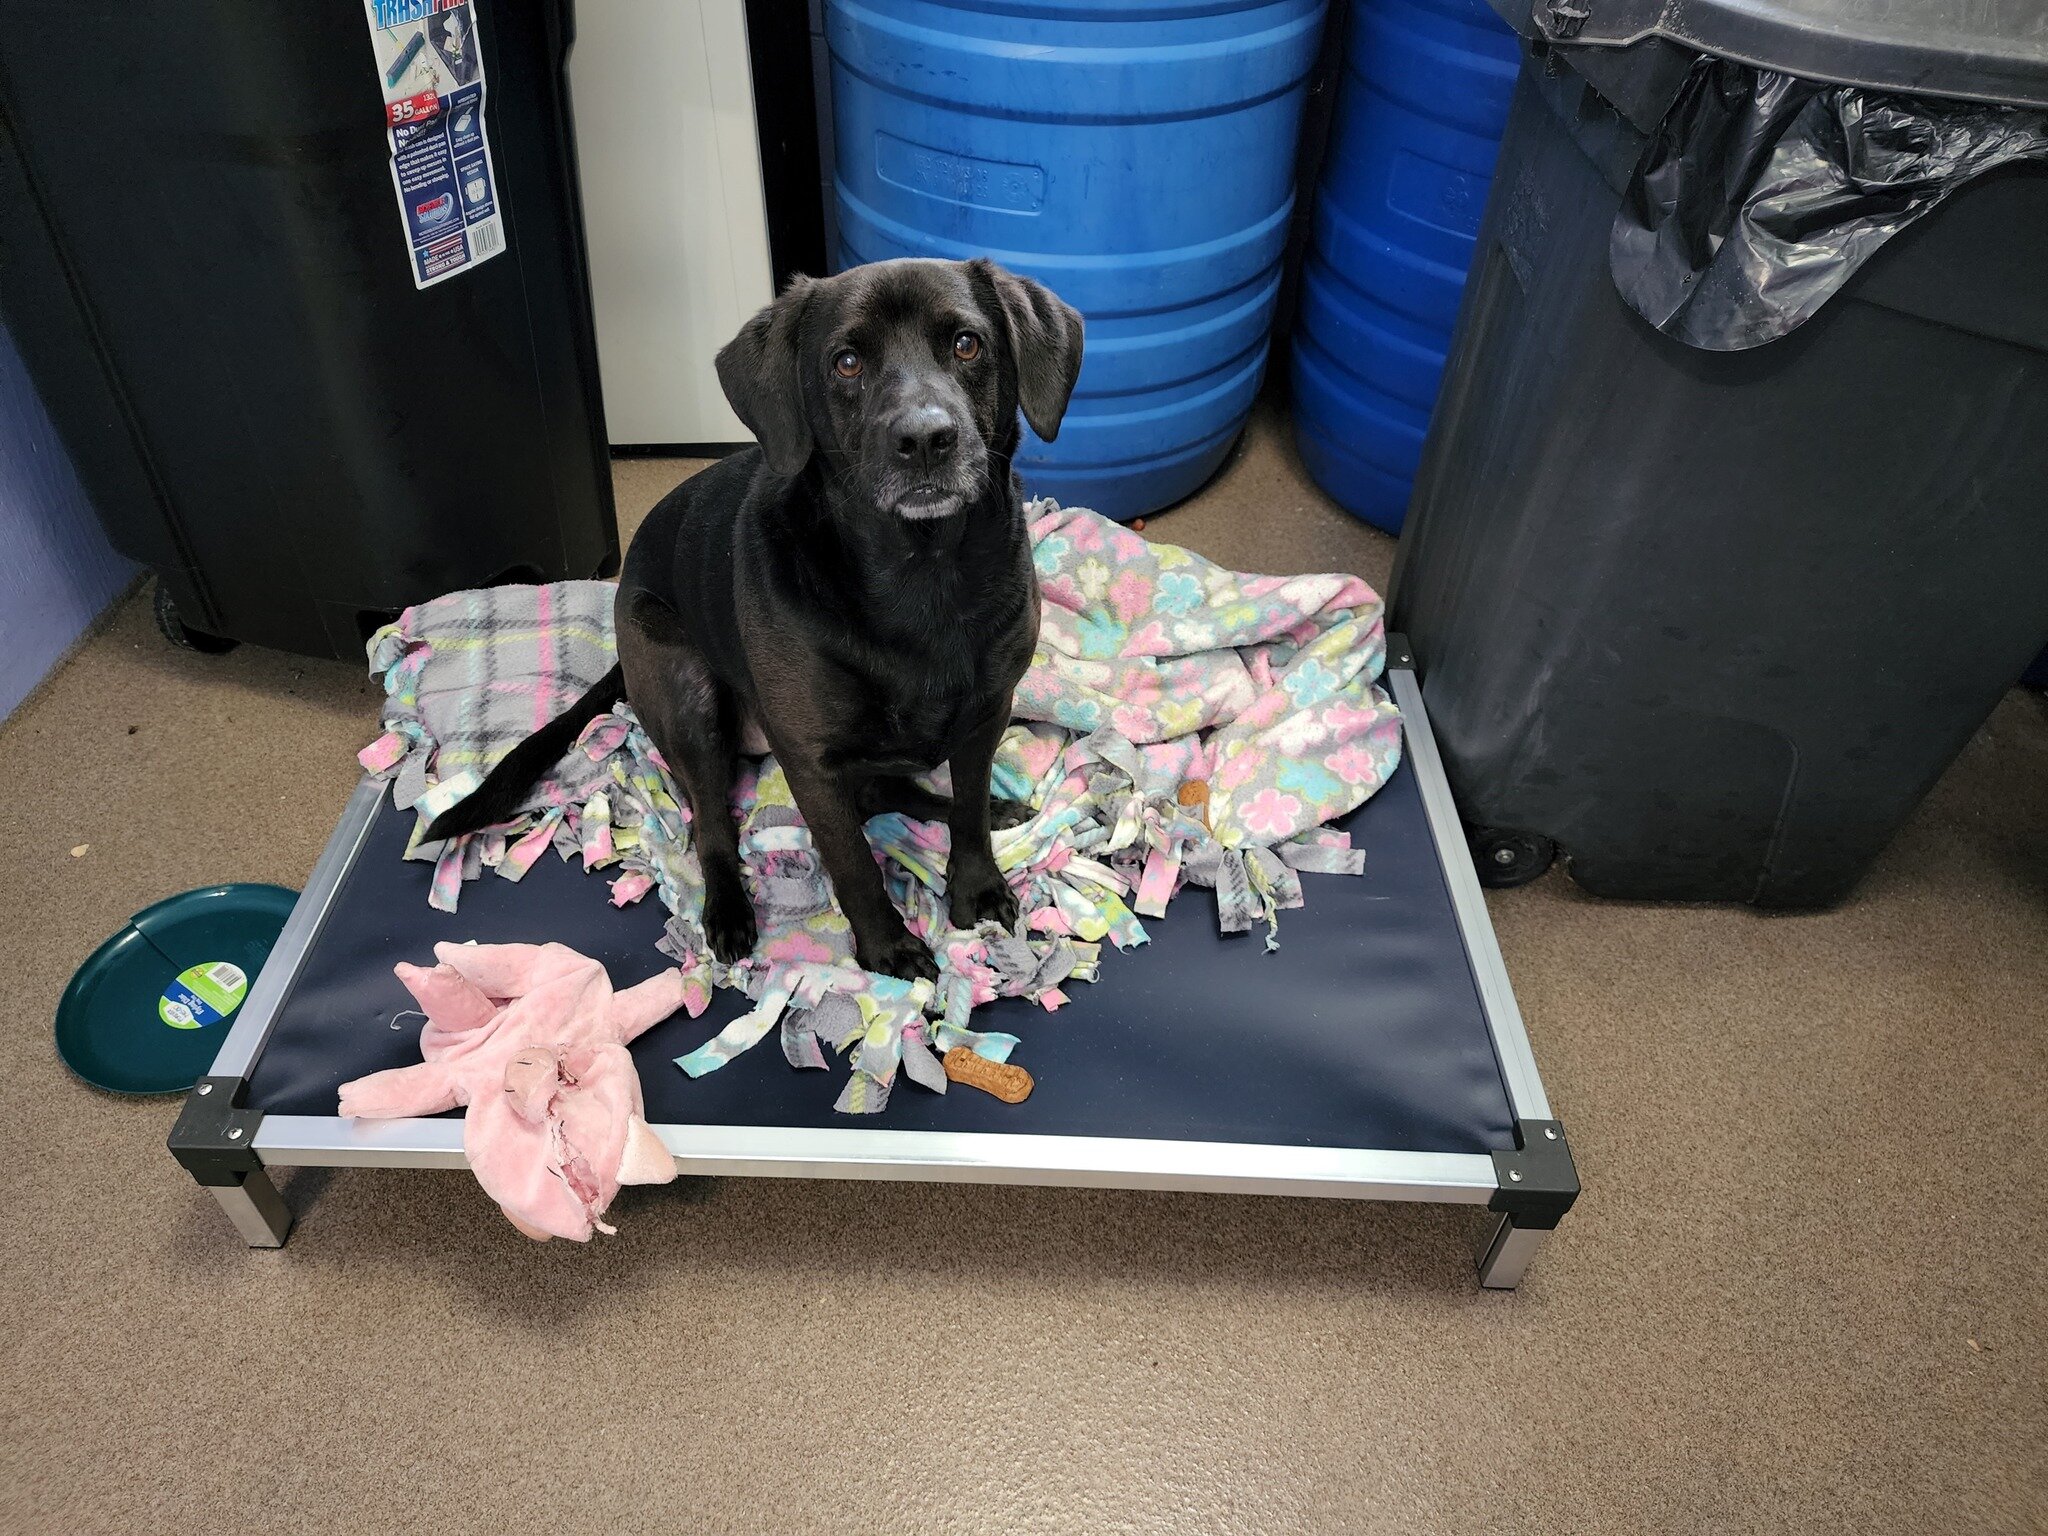 Thank you to everyone who donated so we could send Hawkinsville / Pulaski Animal Control GA - beds for their pups! ❤

&quot;Thank you so much for these beds! We like most shelters have been slammed with minimal rescue help. But here is a pic of Duke 